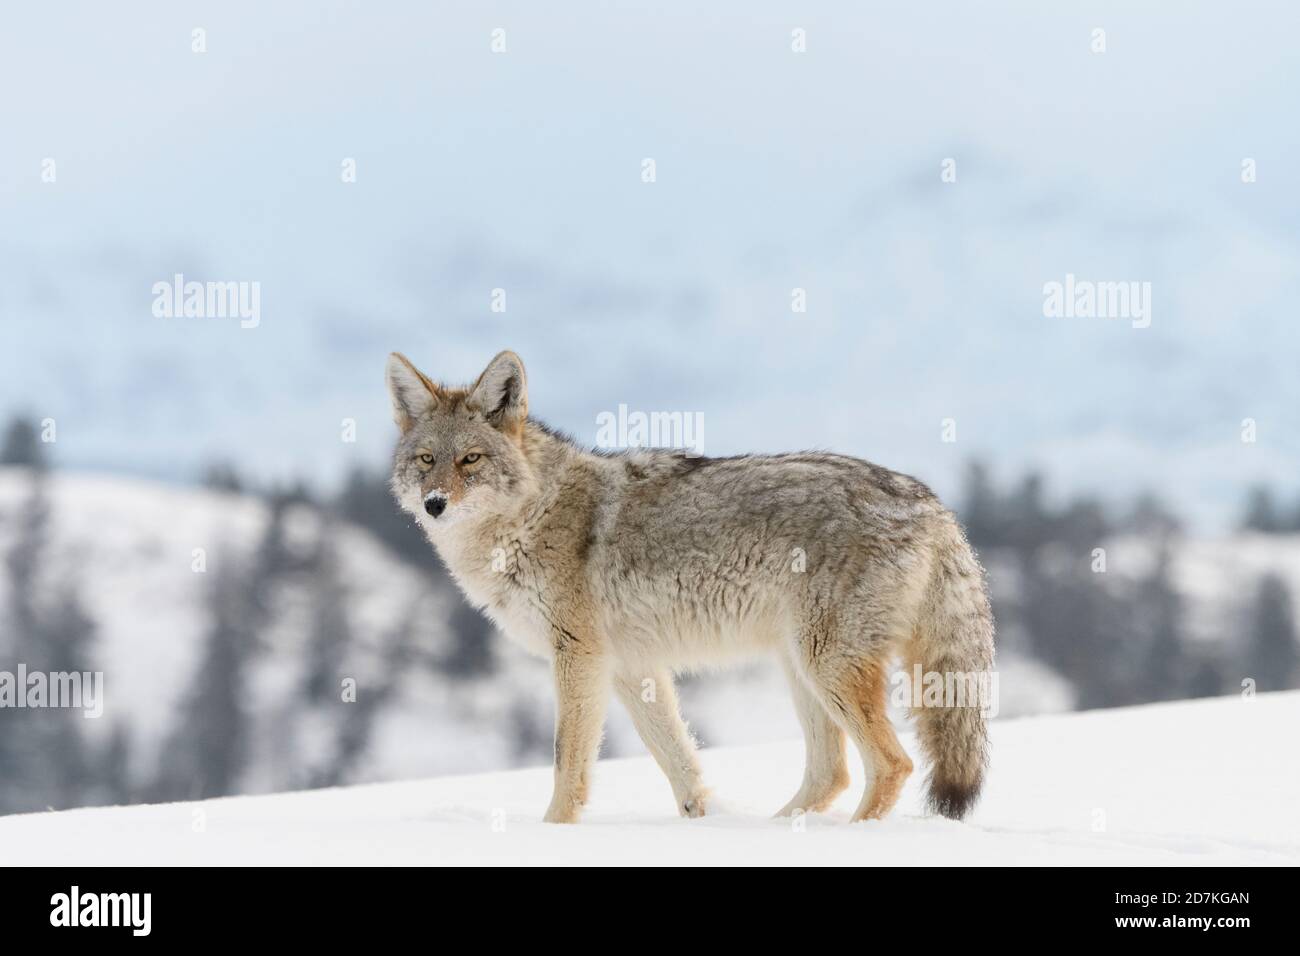 Coyote (Canis latrans), in snow, Yellowstone National Park, Wyoming Stock Photo